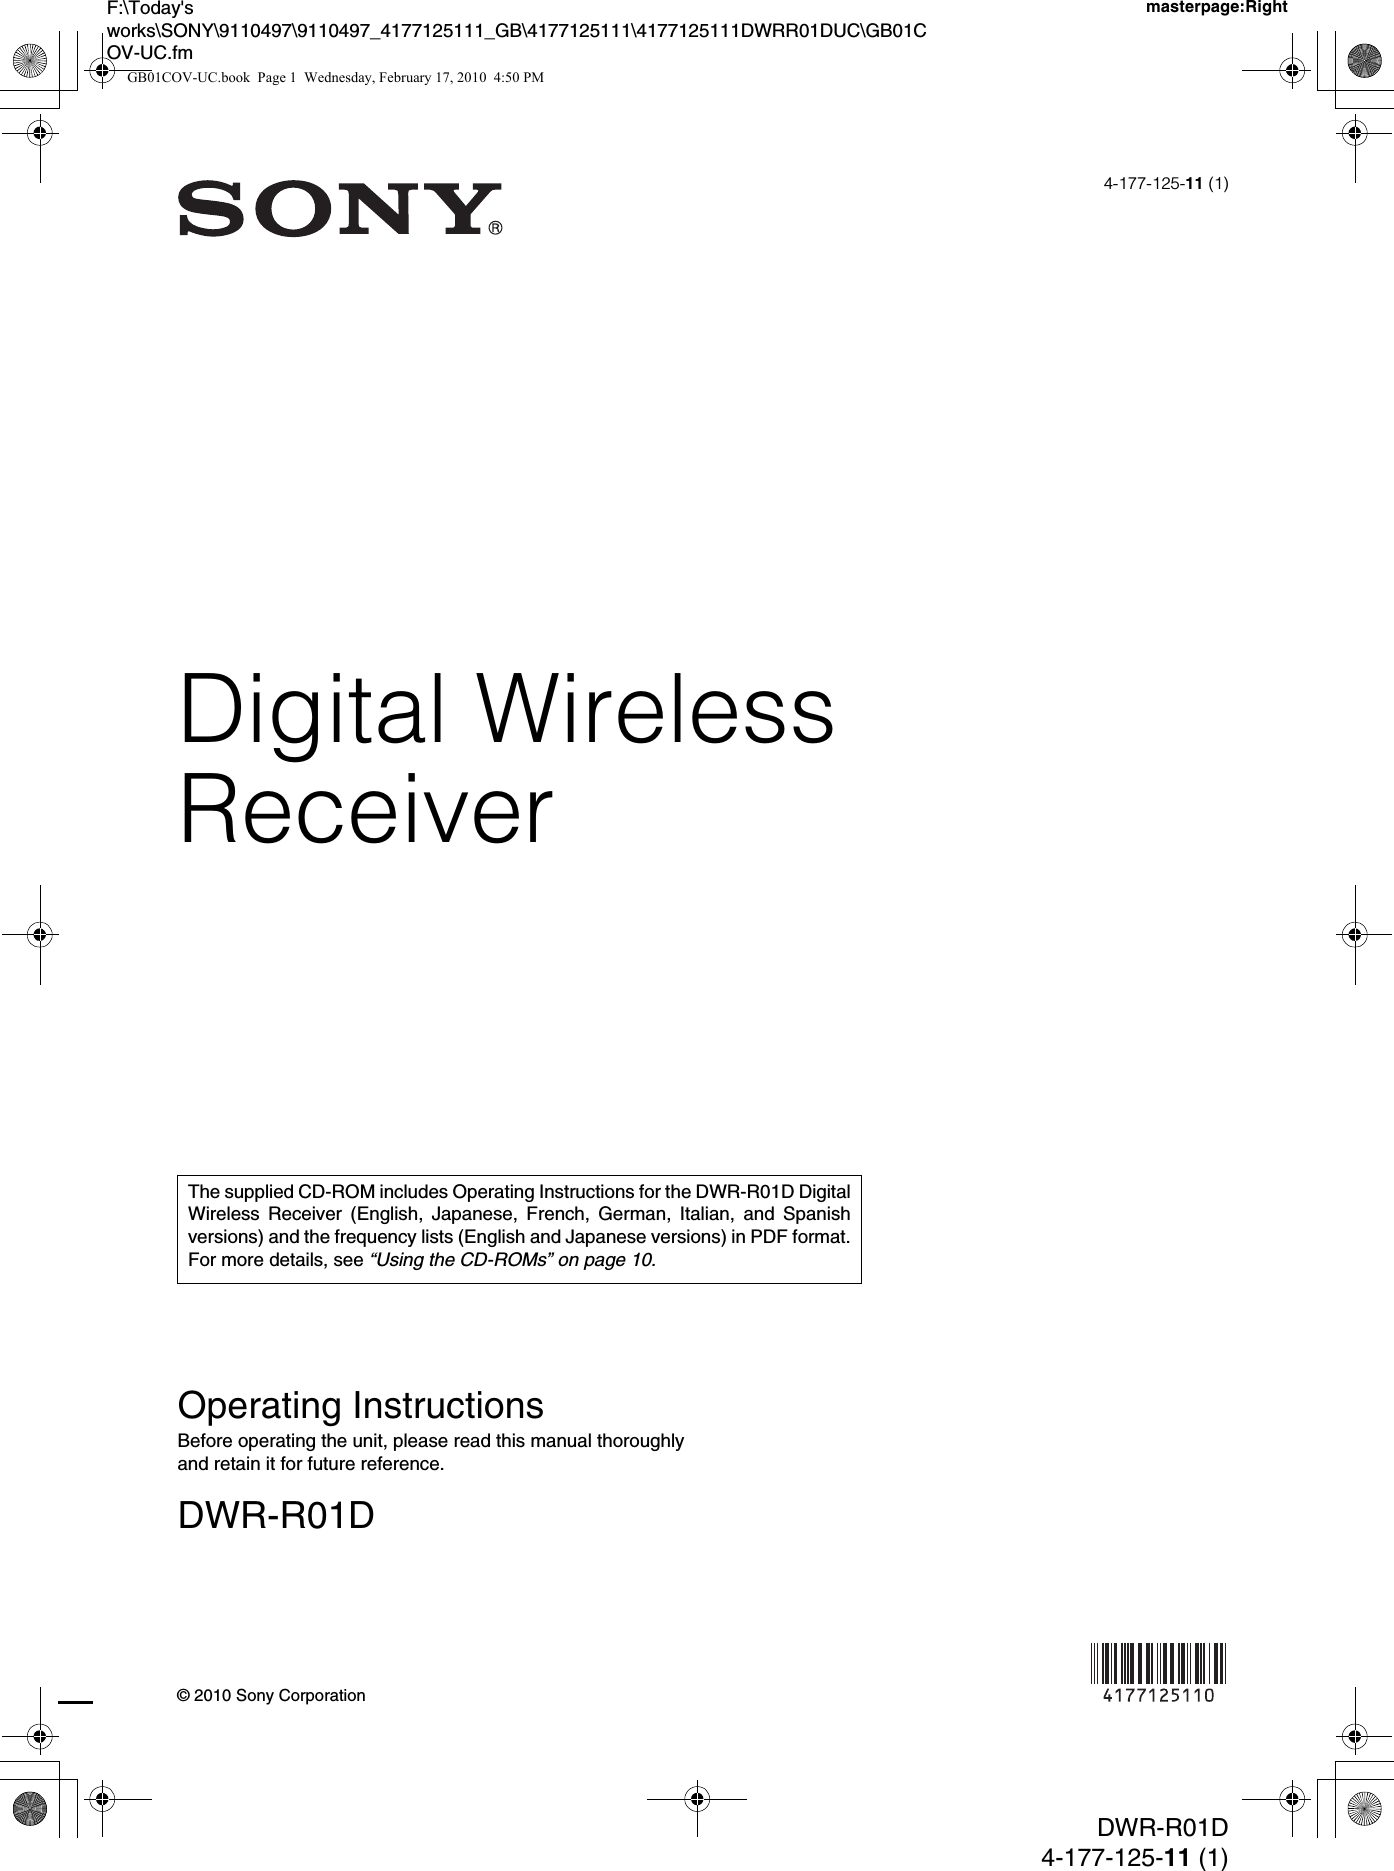 Digital WirelessReceiverF:\Today&apos;sworks\SONY\9110497\9110497_4177125111_GB\4177125111\4177125111DWRR01DUC\GB01COV-UC.fmmasterpage:RightOperating InstructionsBefore operating the unit, please read this manual thoroughly and retain it for future reference.DWR-R01DDWR-R01D4-177-125-11 (1)4-177-125-11 (1)© 2010 Sony CorporationThe supplied CD-ROM includes Operating Instructions for the DWR-R01D DigitalWireless Receiver (English, Japanese, French, German, Italian, and Spanishversions) and the frequency lists (English and Japanese versions) in PDF format.For more details, see “Using the CD-ROMs” on page 10.GB01COV-UC.book  Page 1  Wednesday, February 17, 2010  4:50 PM